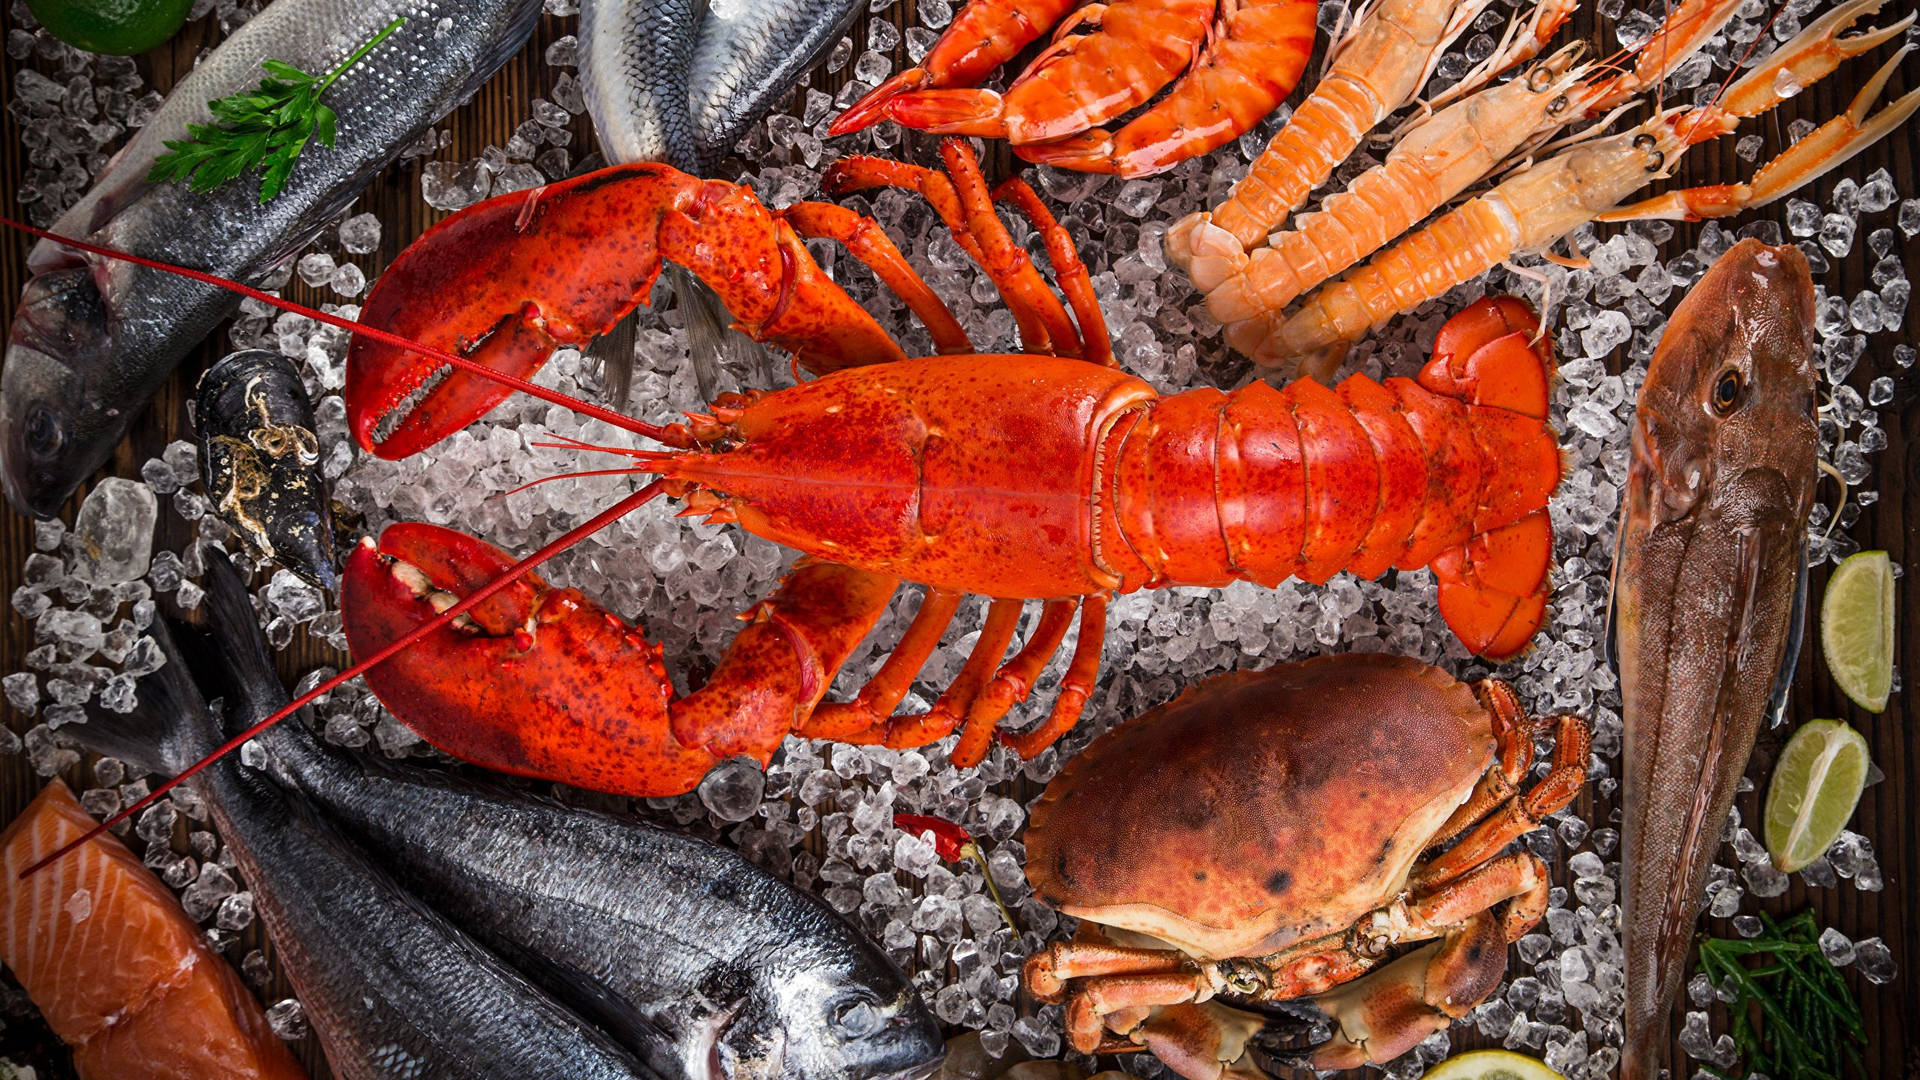 Sumptuous Lobster And Seafood Wallpaper